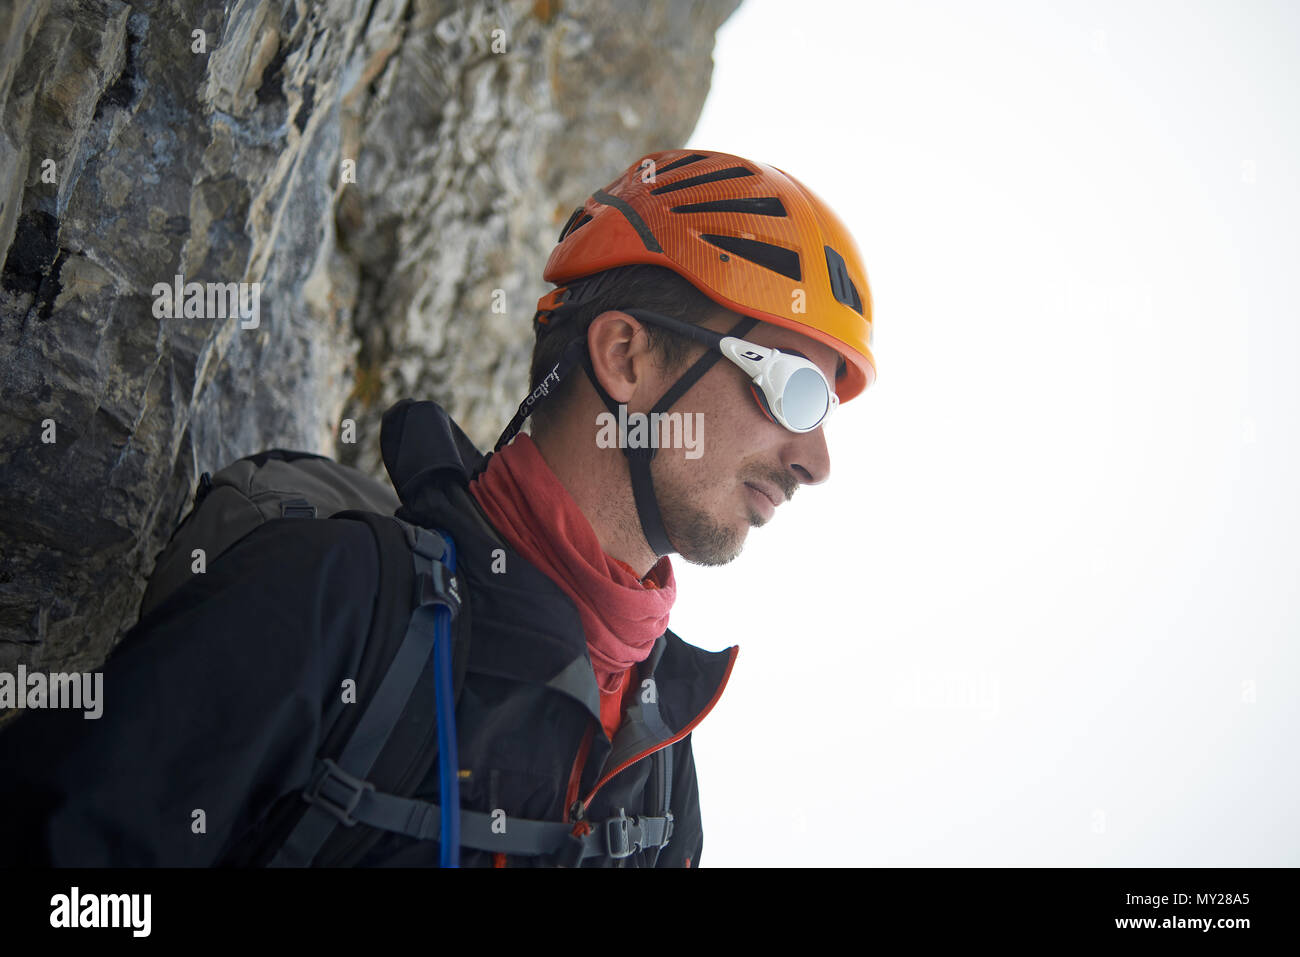 Mountaineer standing on a rock in climbing gear looking out into the distance over the mountains Stock Photo